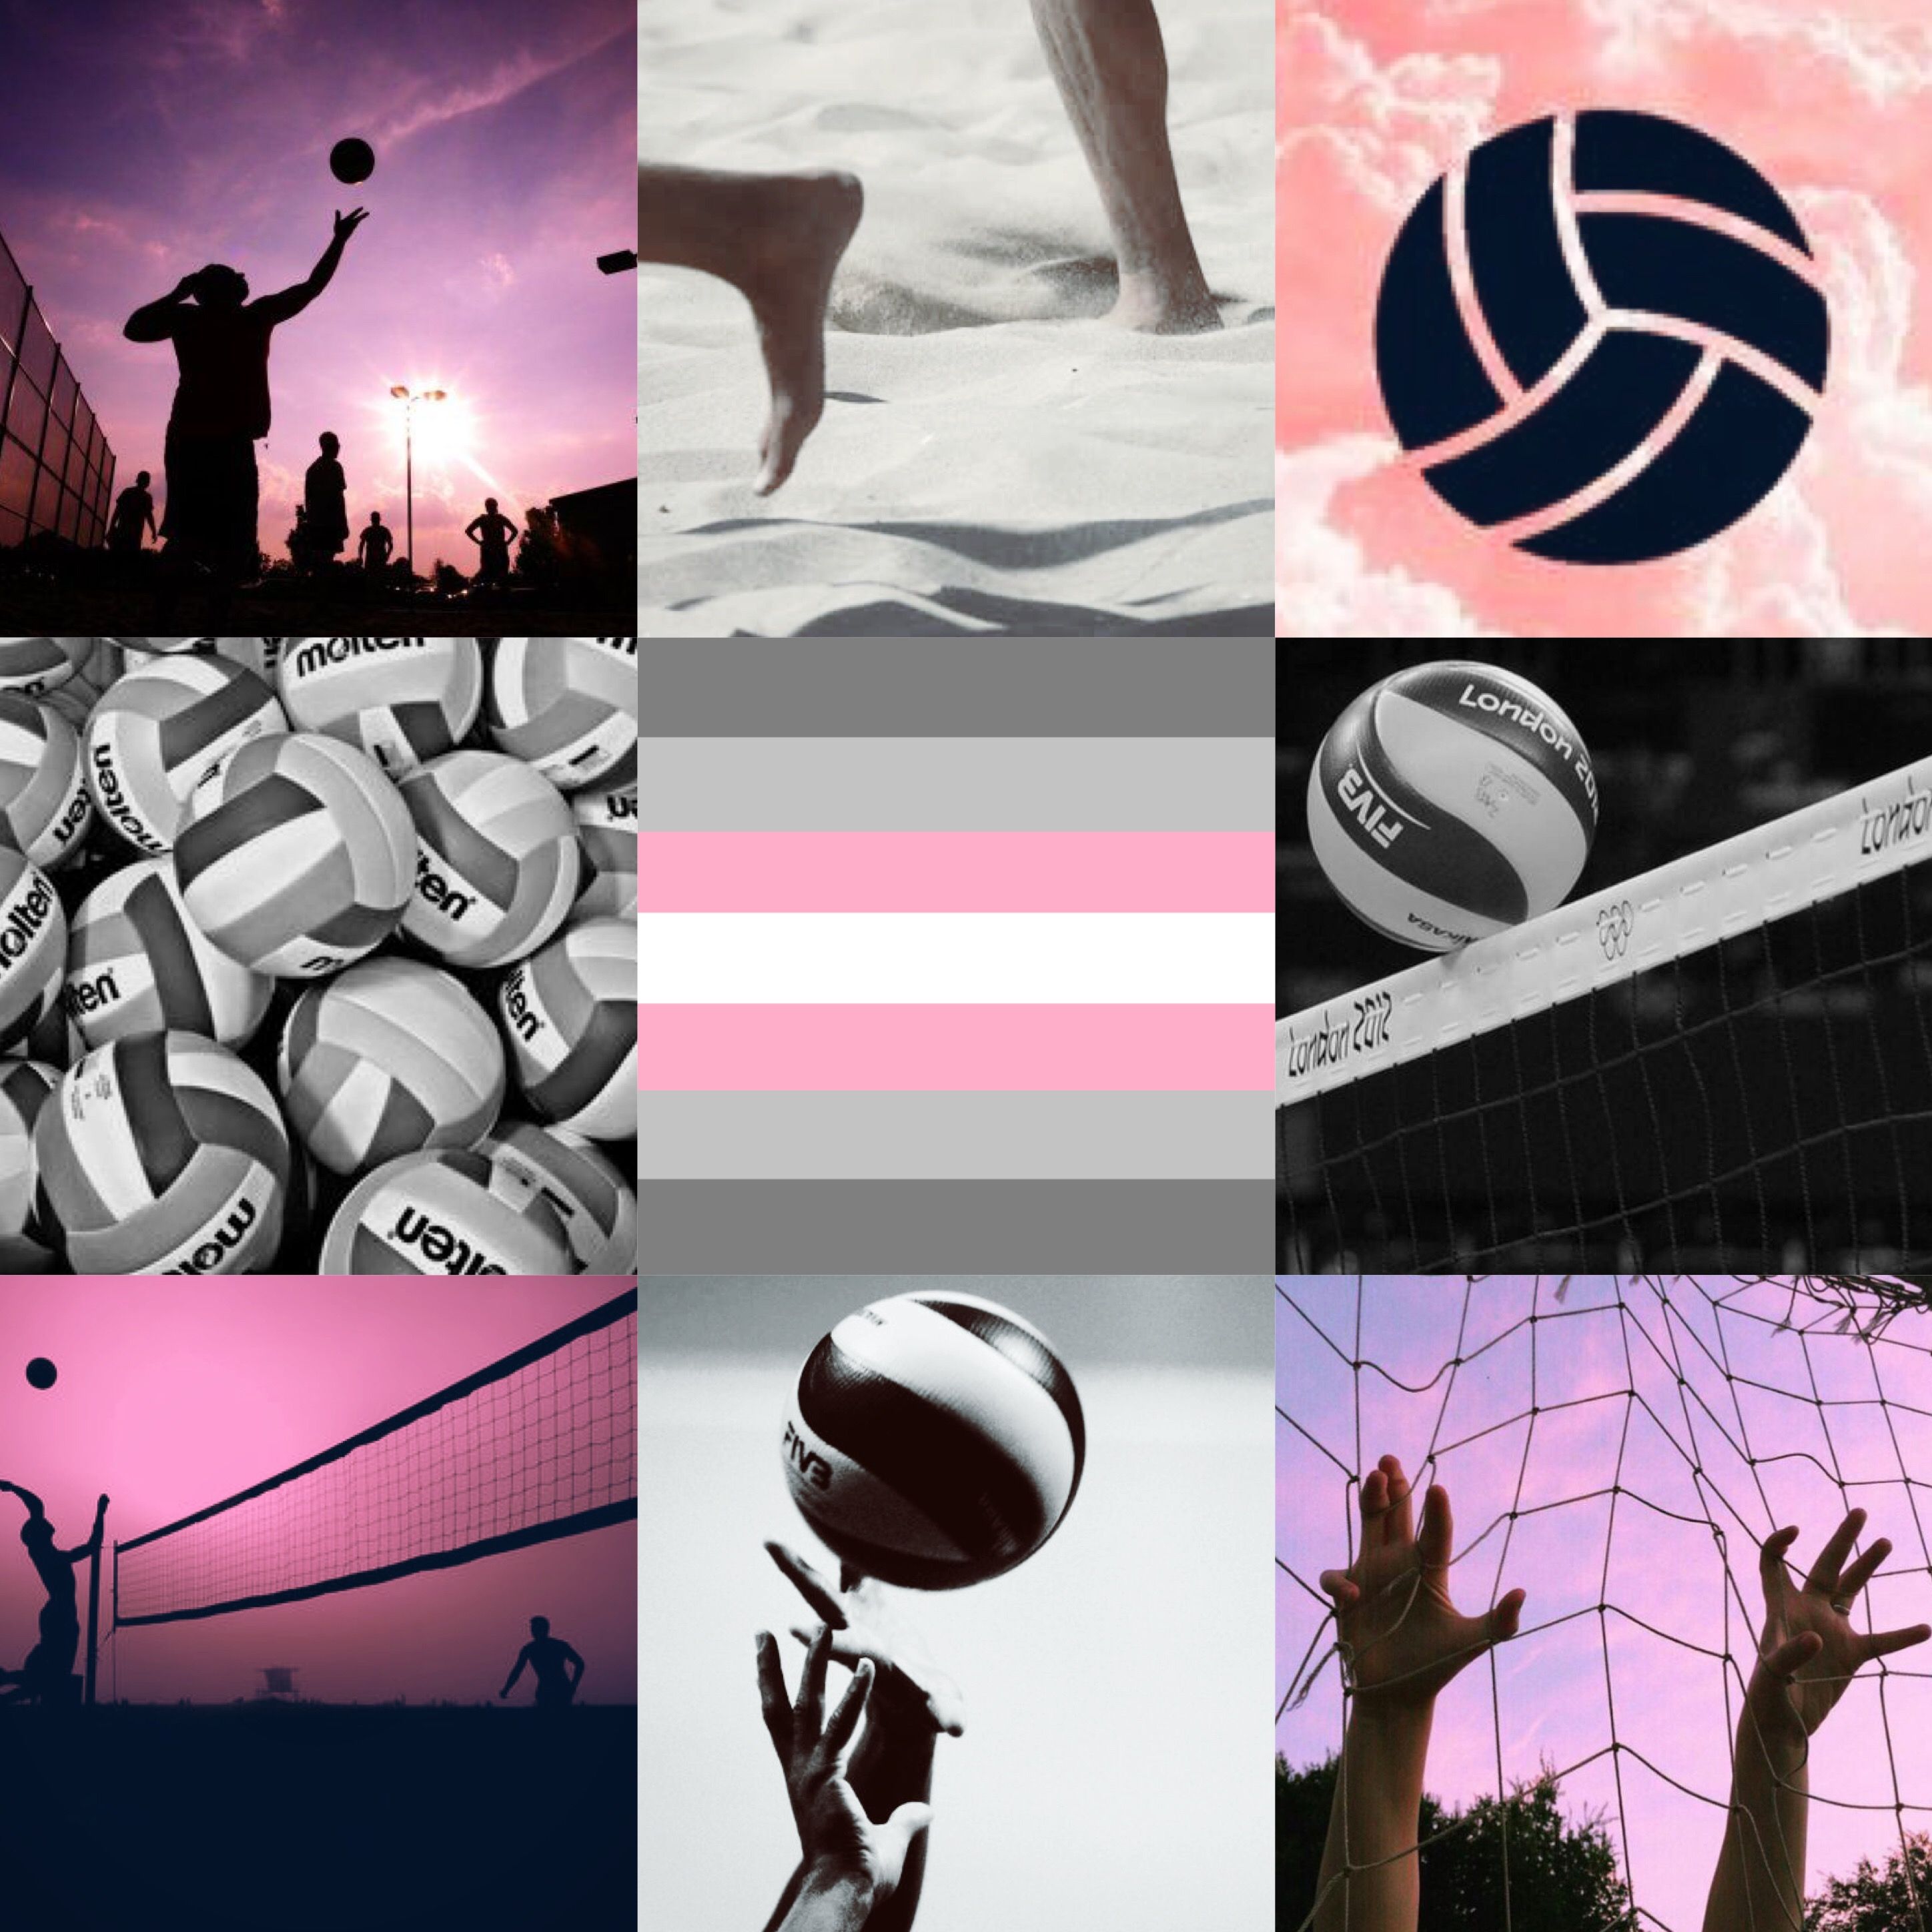 Volleyball Demigirl Aesthetic. Volleyball wallpaper, Volleyball background, Volleyball workouts